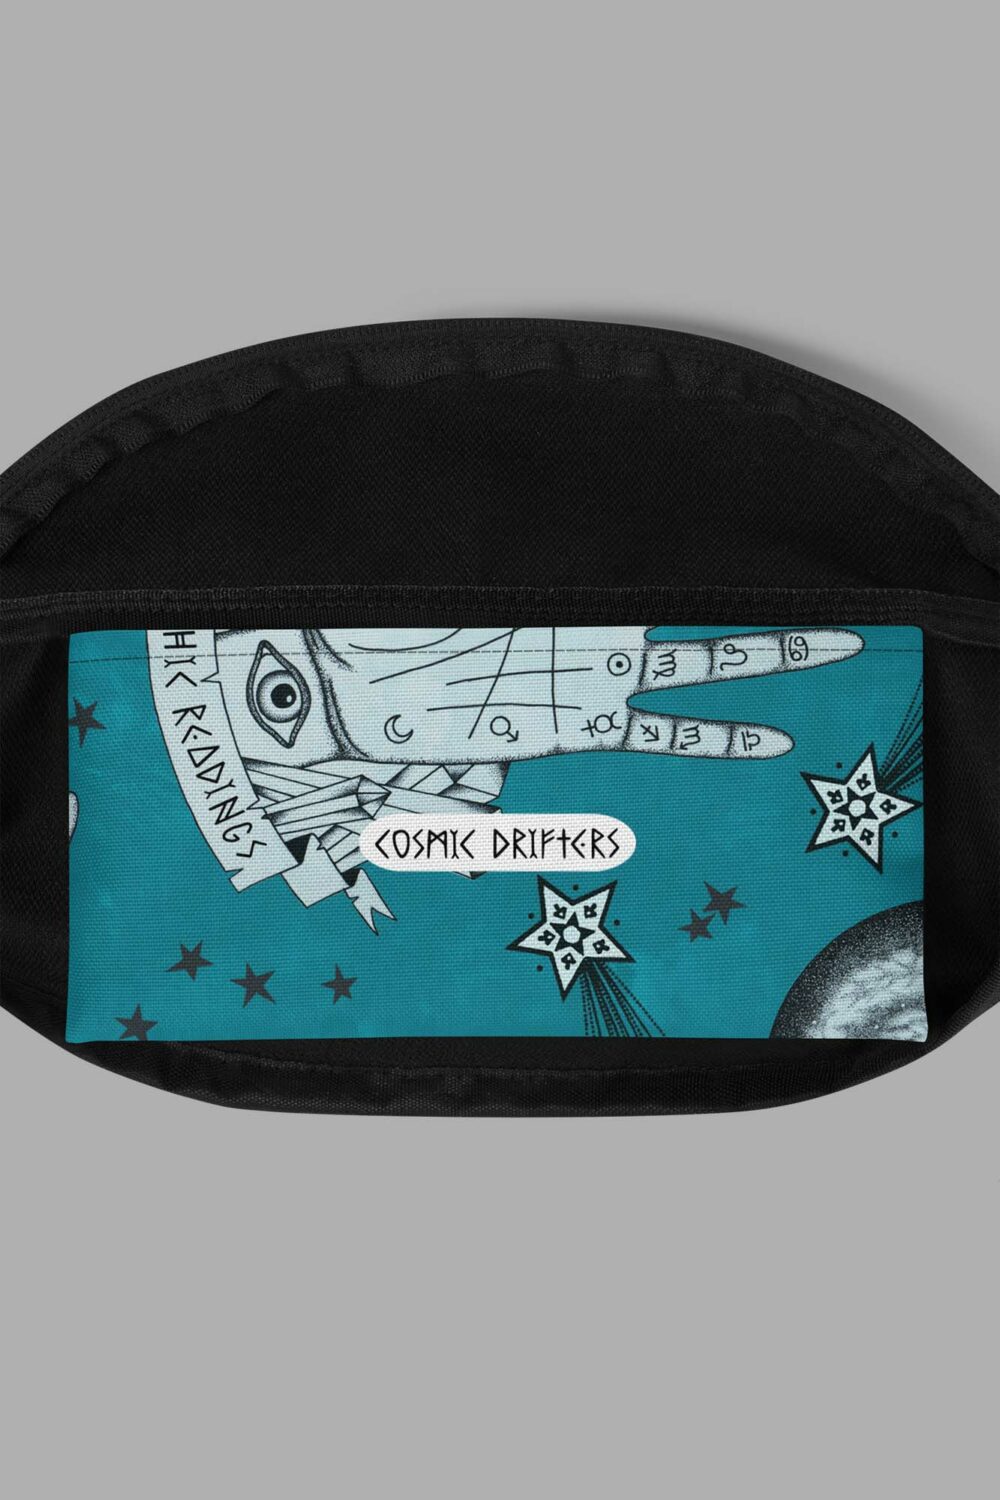 cosmic drifters clairvoyant print fanny pack pocket